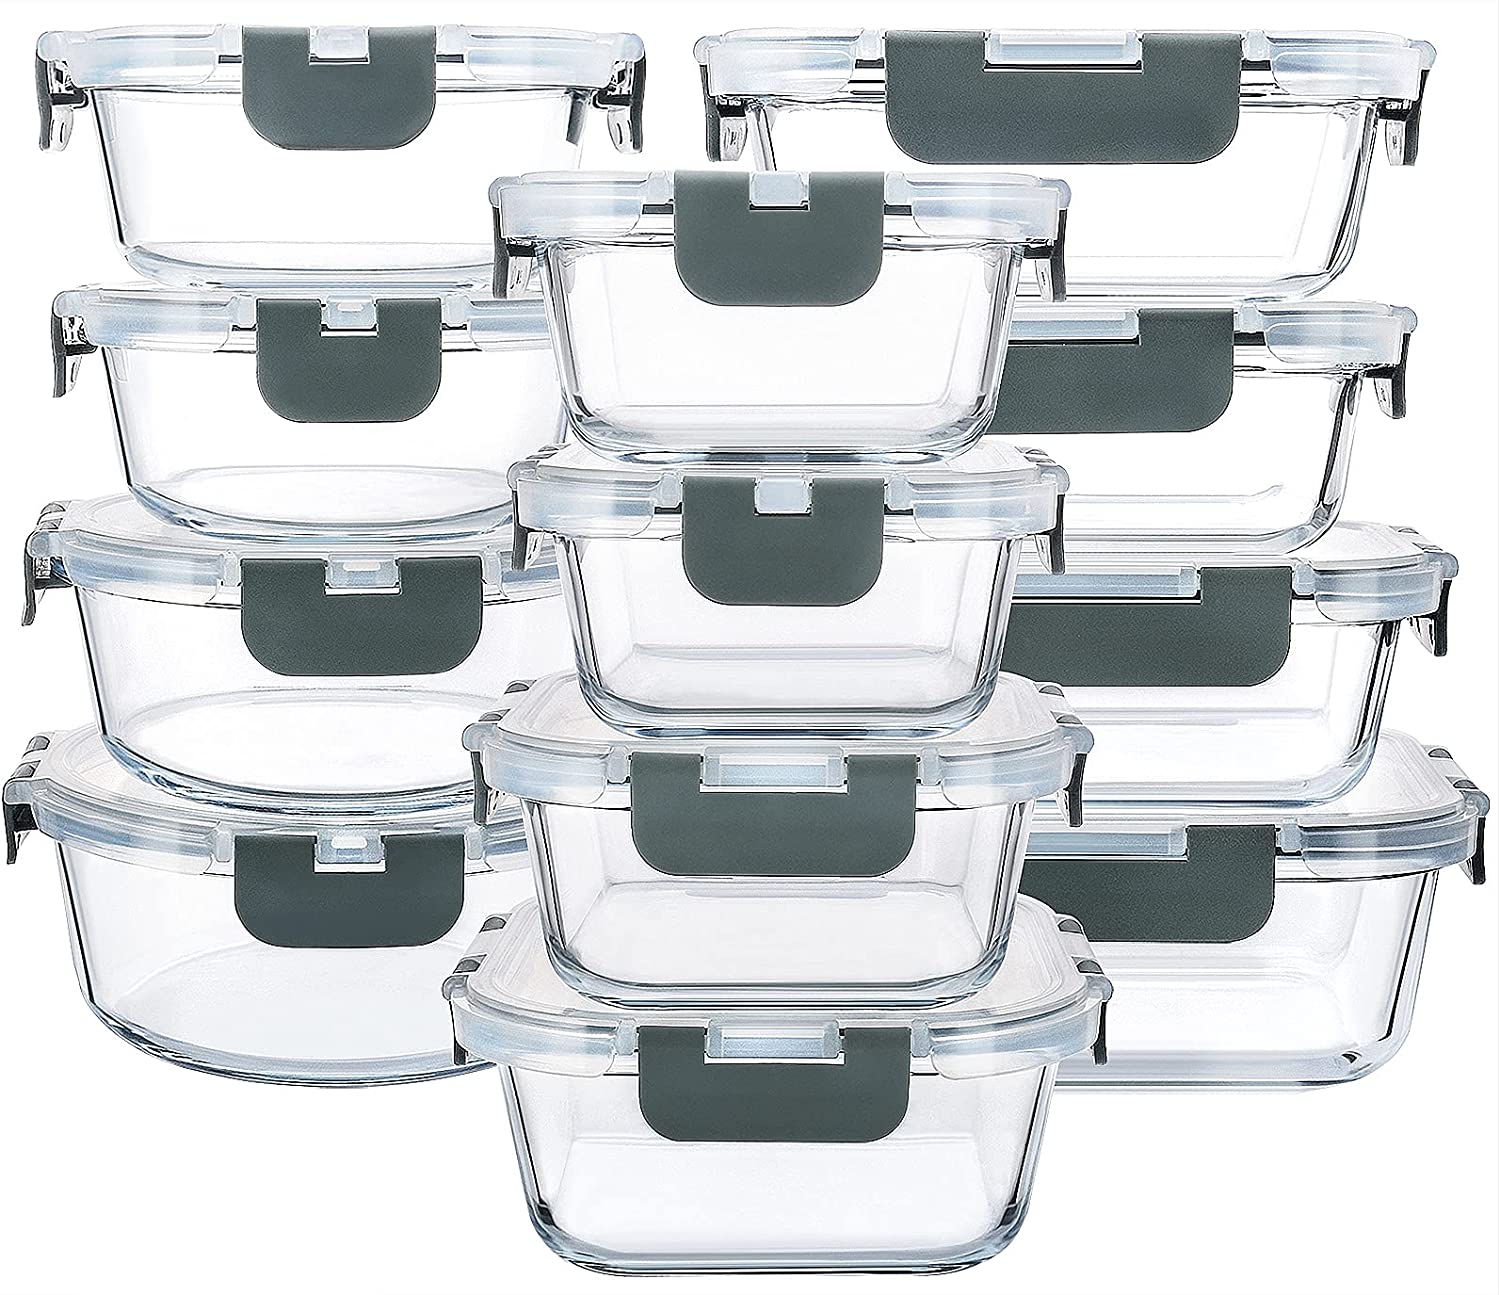 Airtight glass storage containers